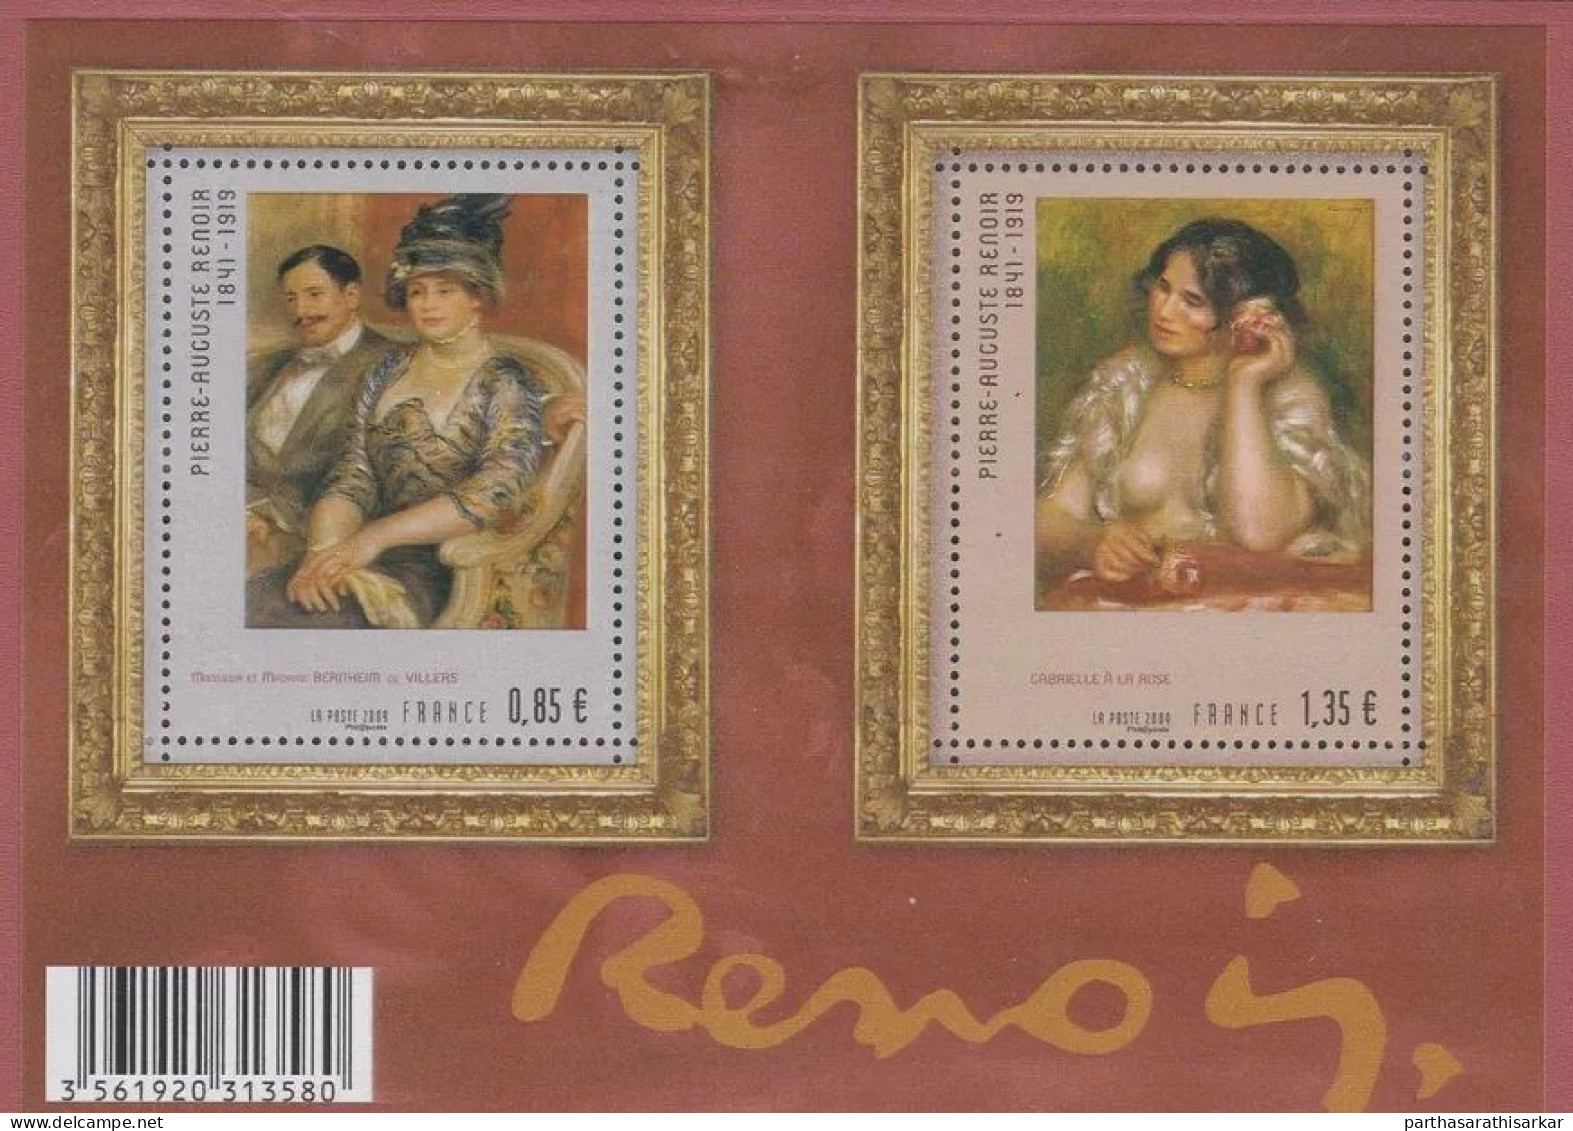 FRANCE 2009 THE 90TH ANNIVERSARY OF THE DEATH OF PIERRE-AUGUSTE RENOIR, 1841-1919 PAINTINGS MINIATURE SHEET MS MNH - Nuevos